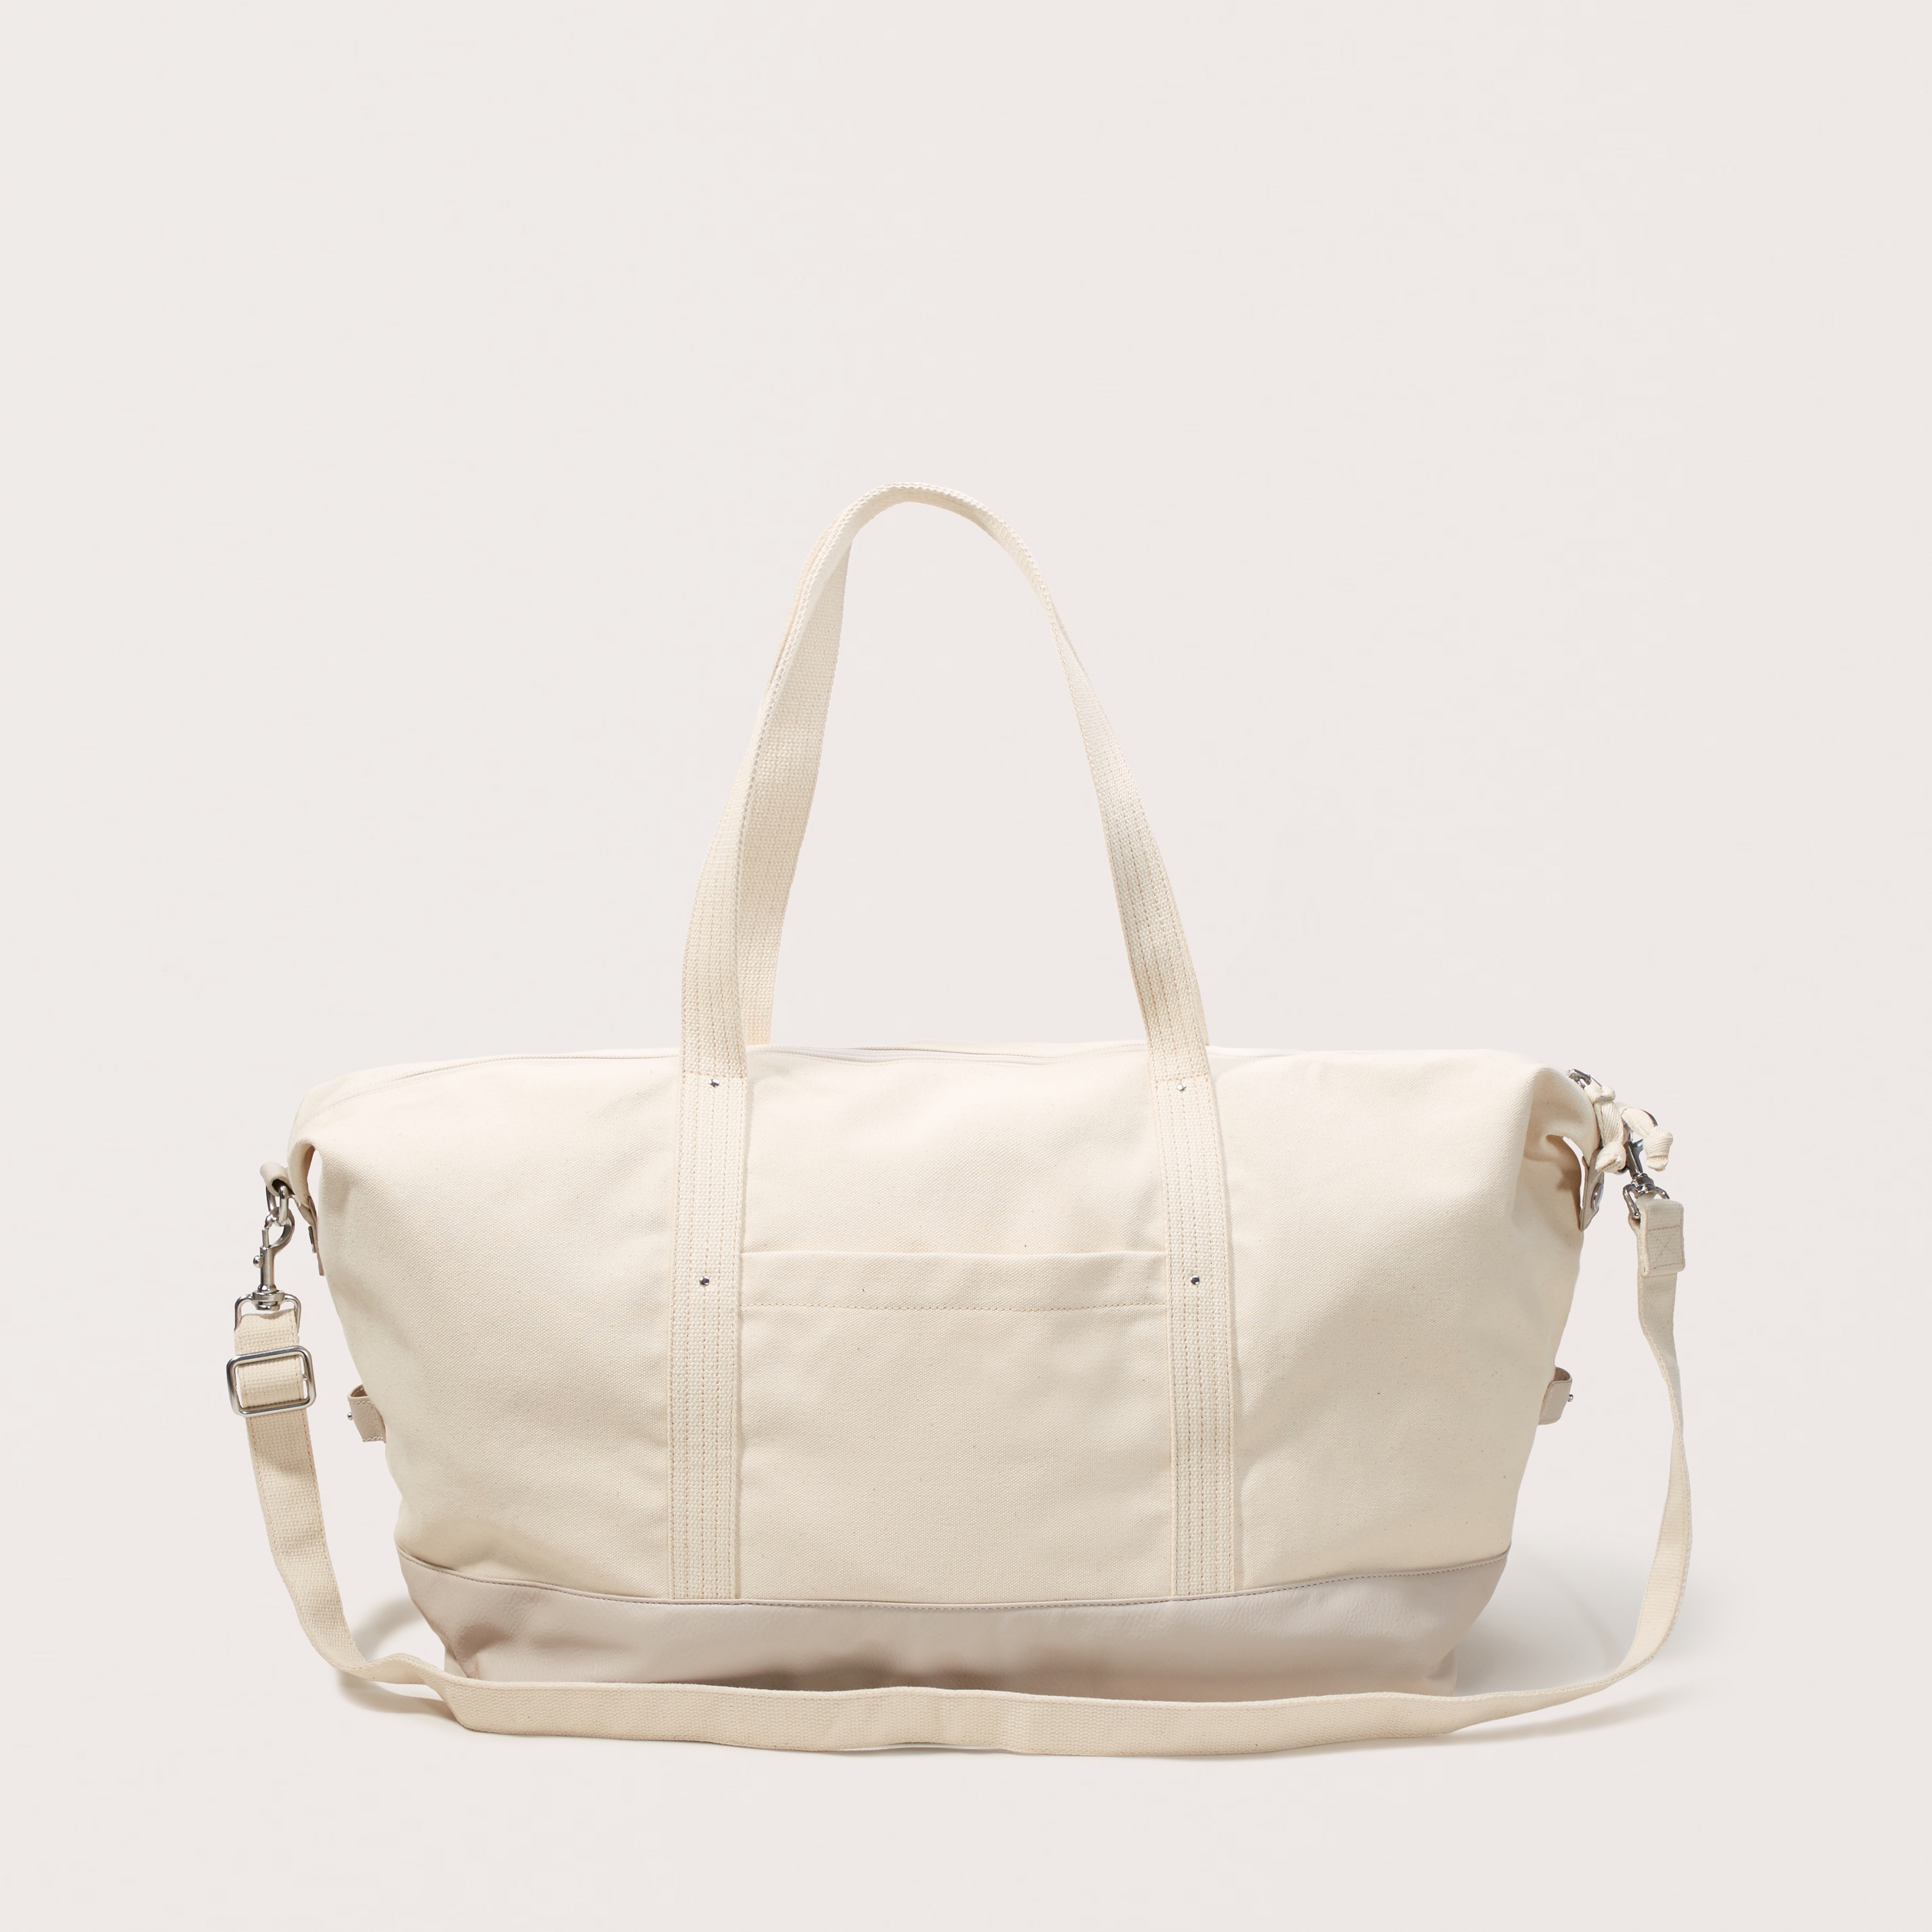 abercrombie and fitch weekender bag